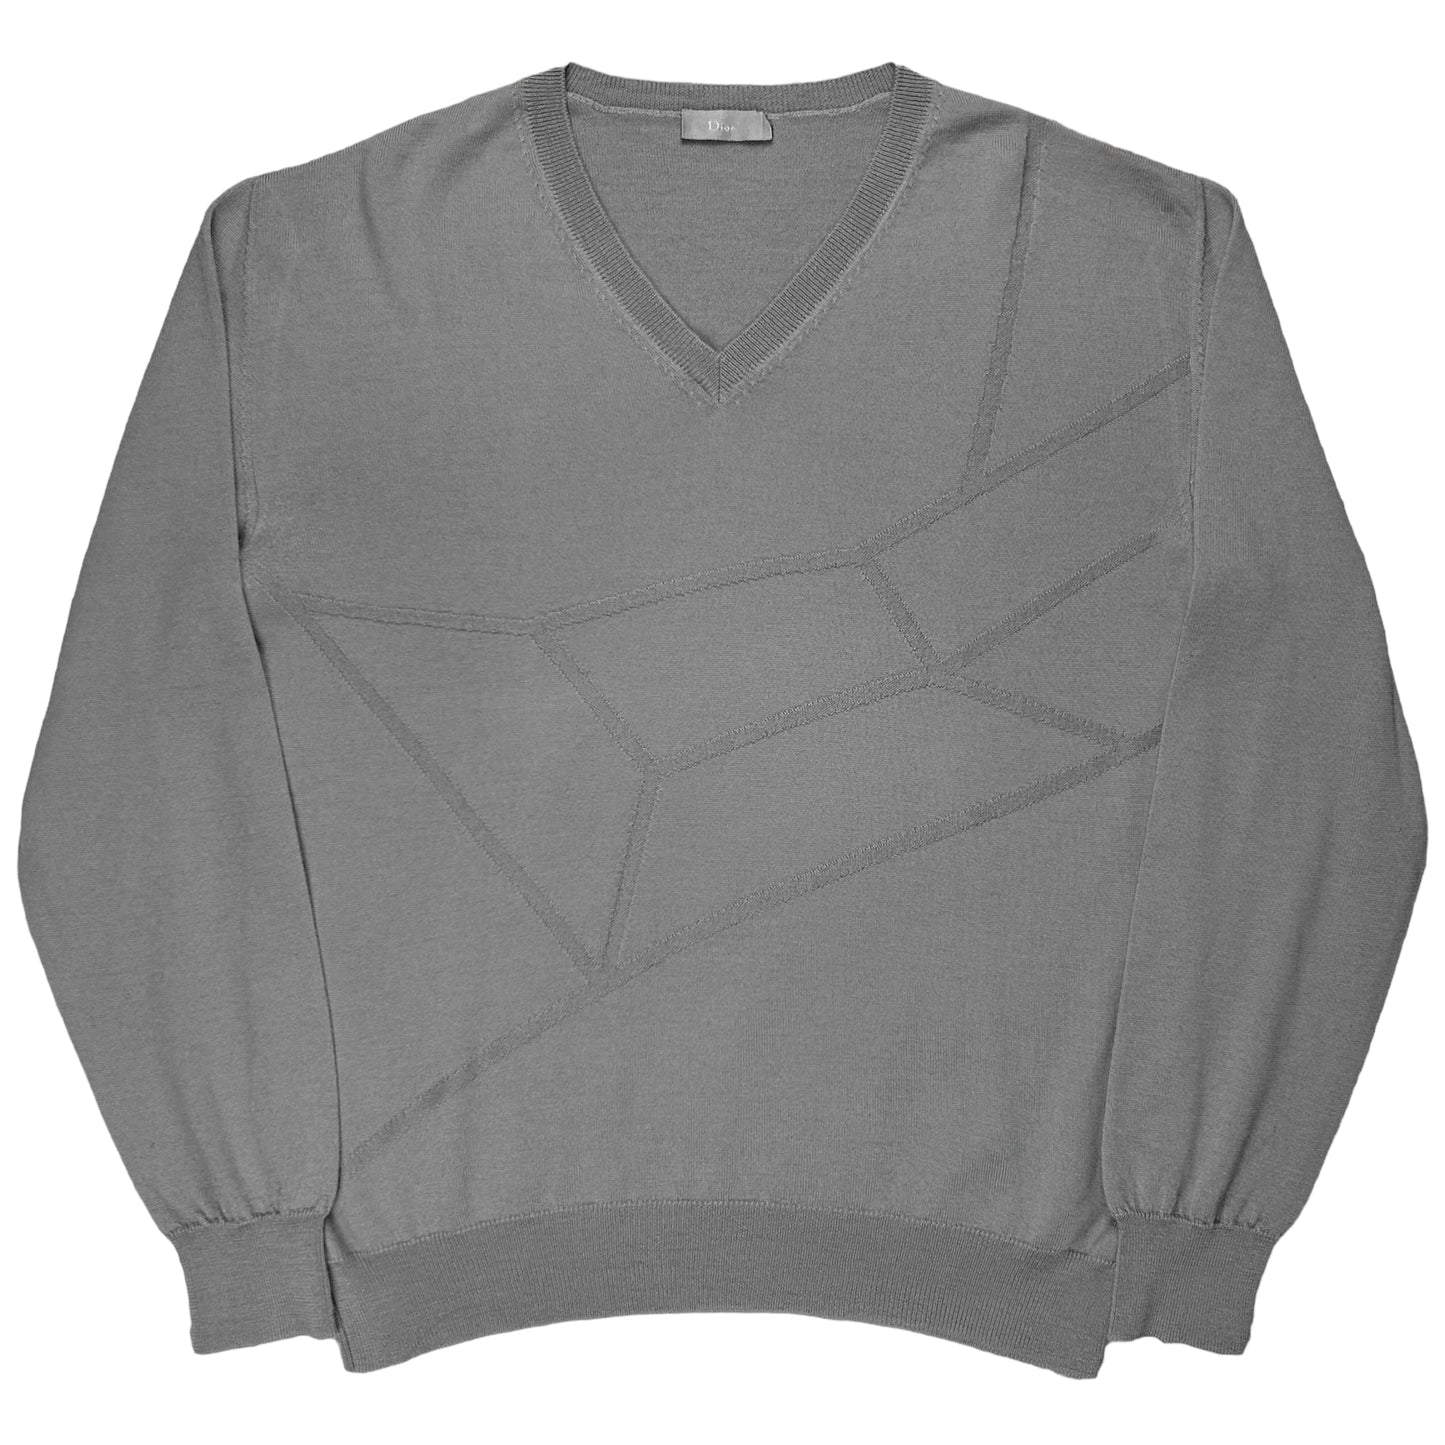 Dior Homme Distorted Lines V-Neck Sweater - AW11